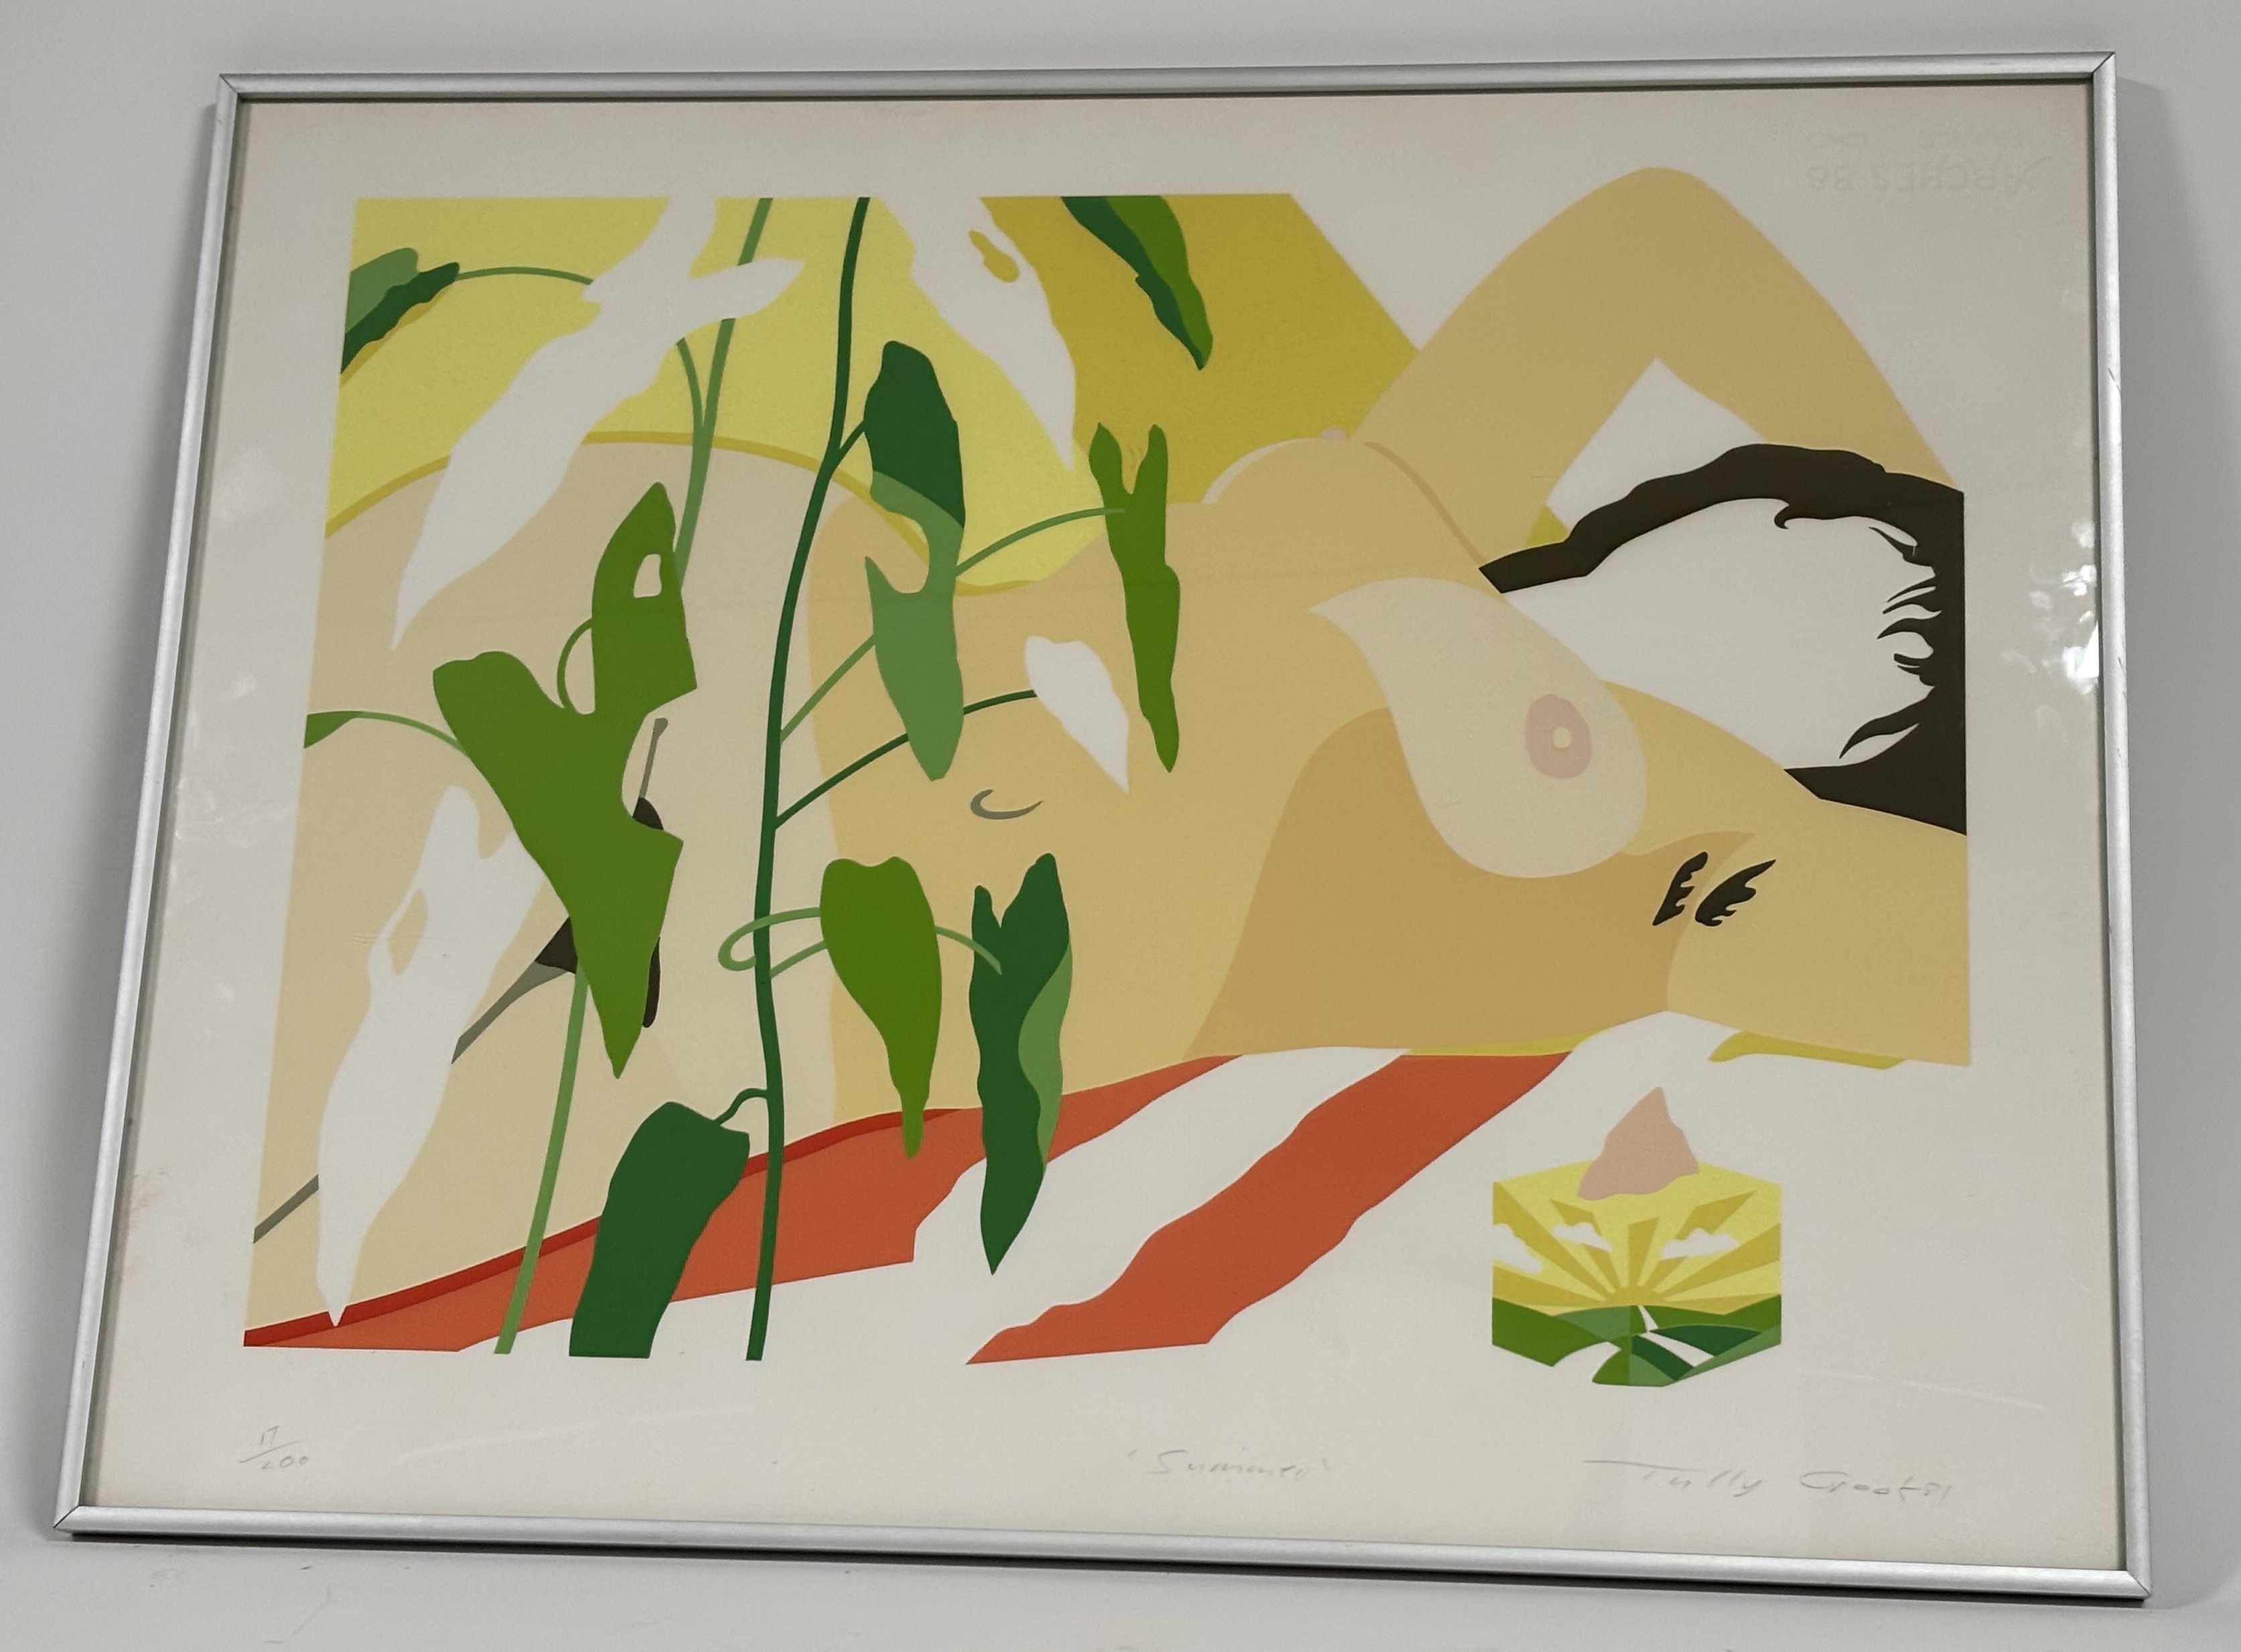 Tully Crook (British 1938-), "Summer", limited screenprint 17/20, signed, titled and numbered pencil